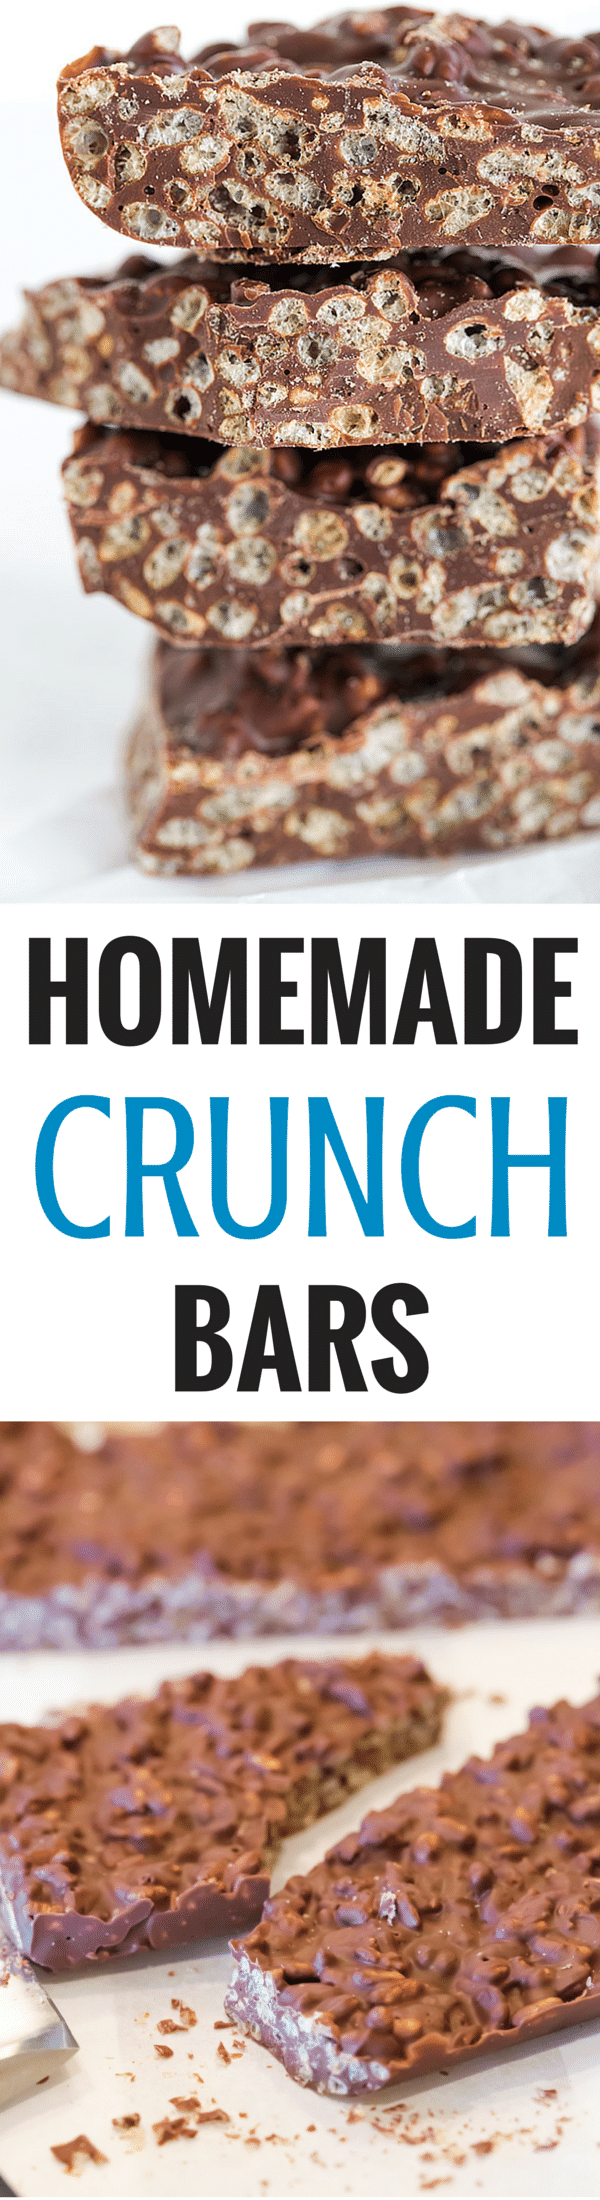 These homemade Crunch bars are SO easy and only require TWO ingredients!